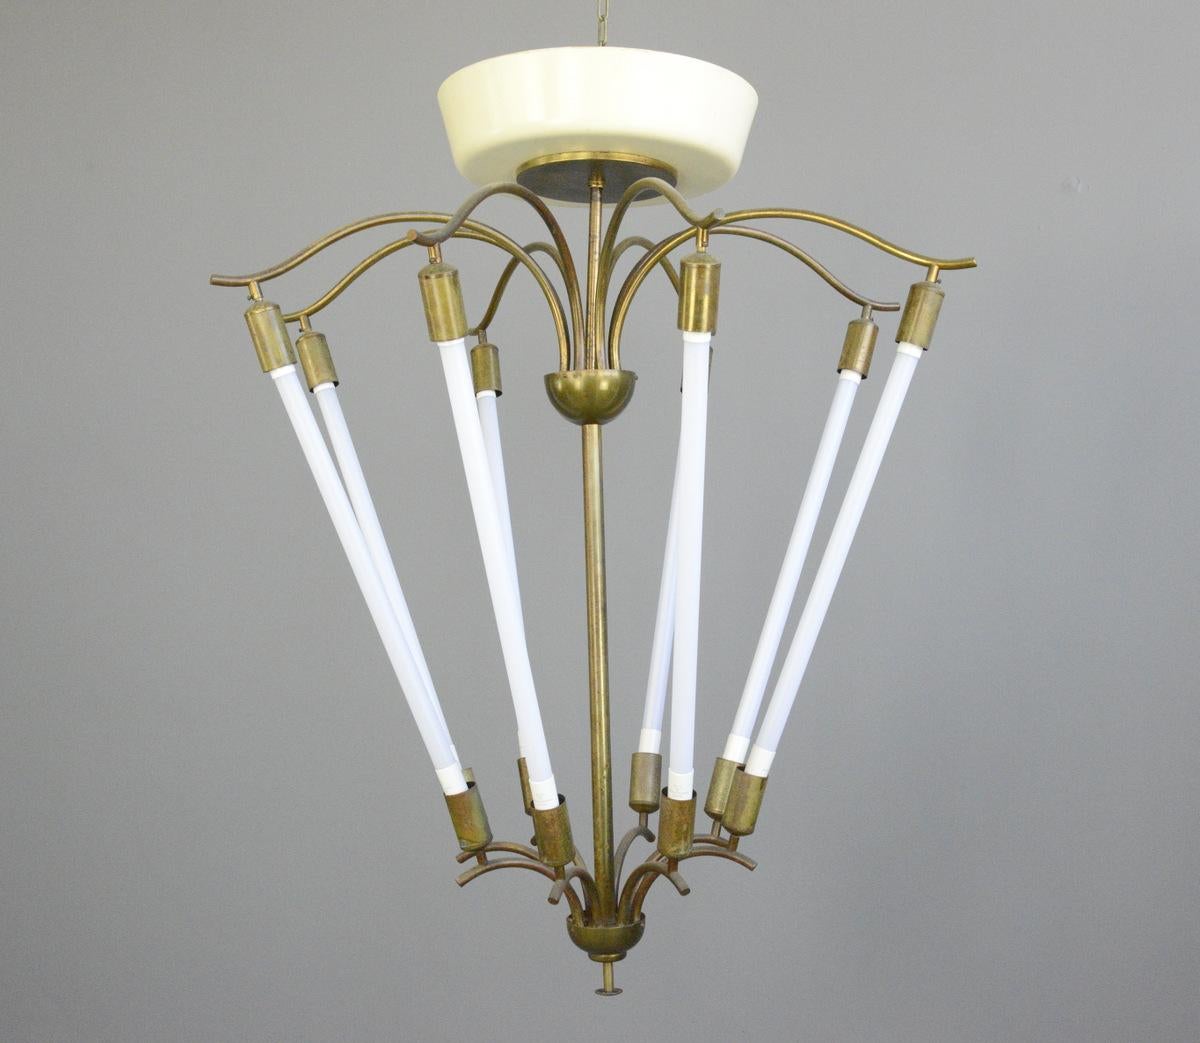 Large Bauhaus lobby chandelier, circa 1930s

- Sculptural curved brass
- Takes 8x LED tube bulbs
- Original designed to hang in cinema lobbies
- Made by Kaiser
- German, 1930s
- Measures: 112cm tall x 93cm wide 

Condition report:

Fully